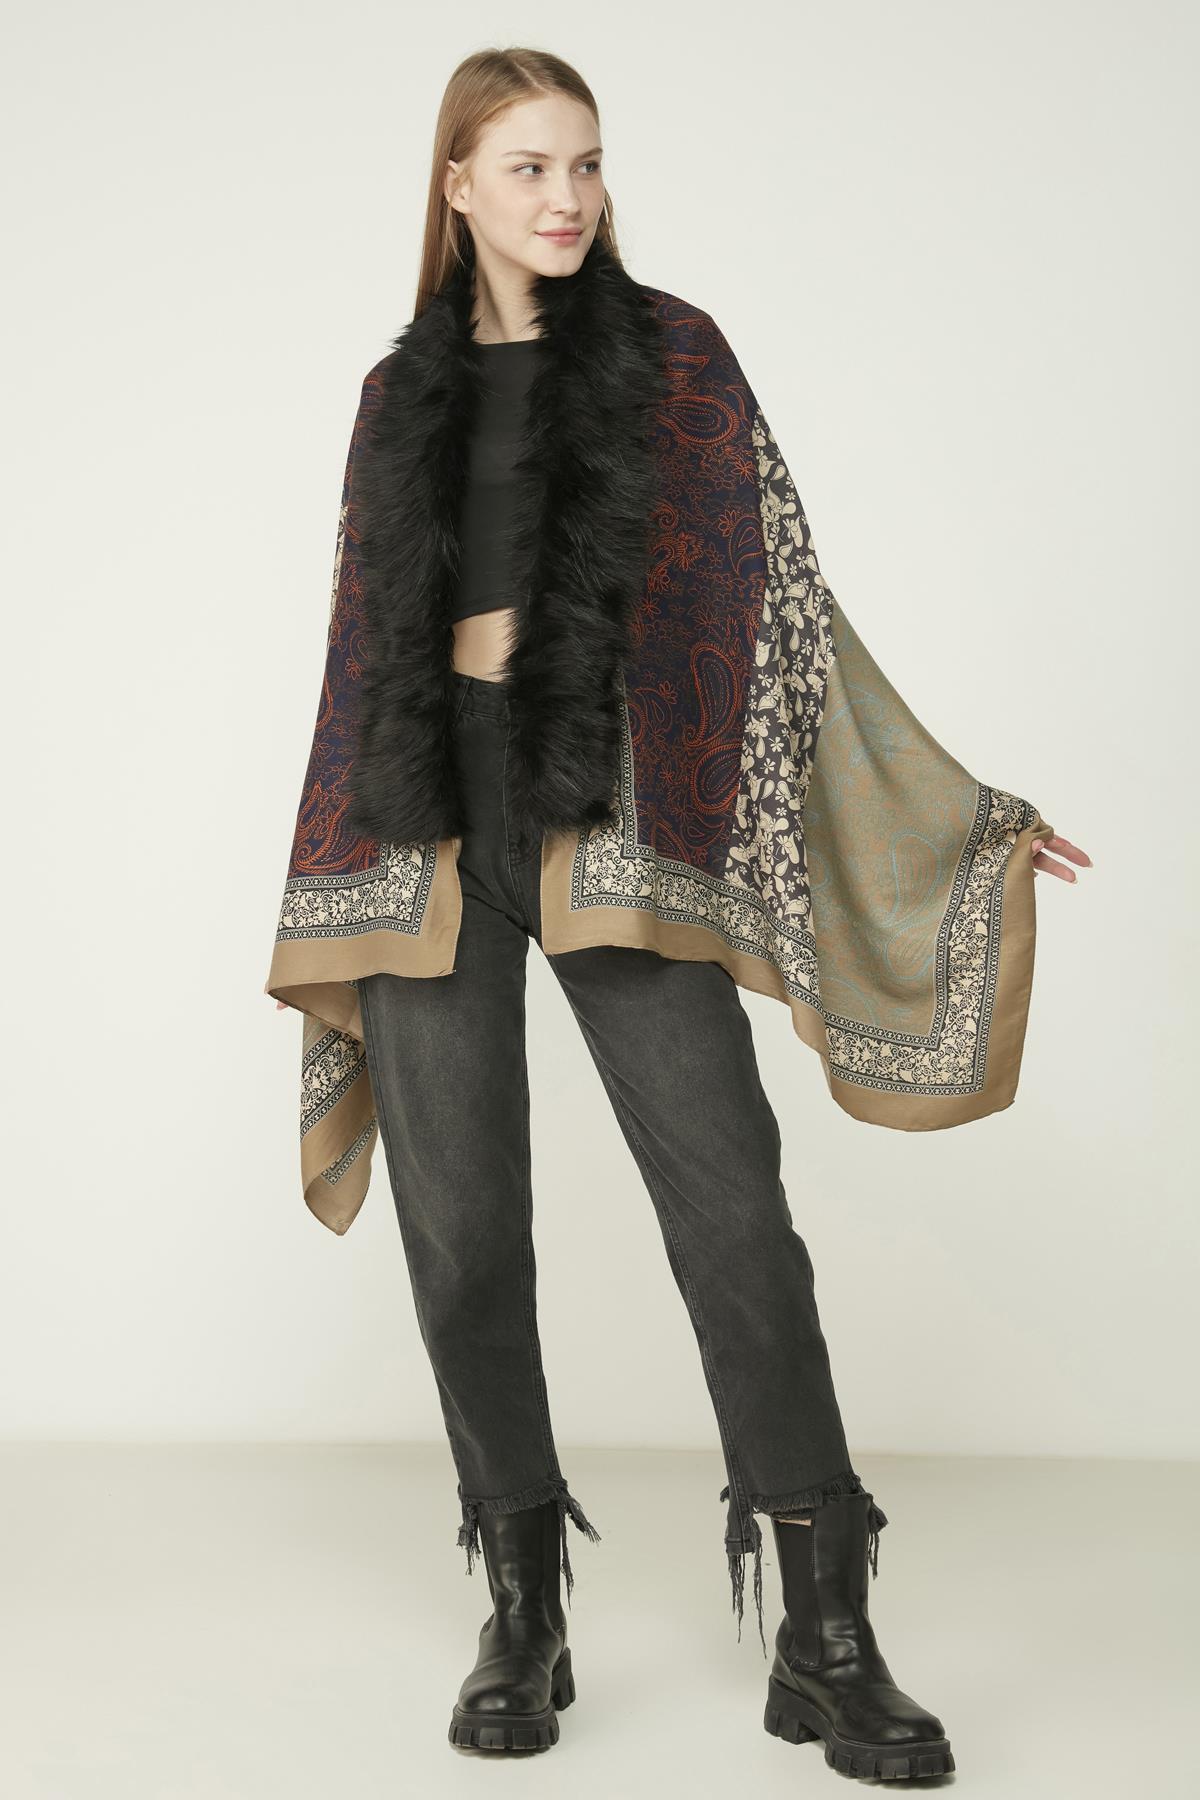 A wholesale clothing model wears Paisley Patterned Poncho - Mink, Turkish wholesale Poncho of Axesoire